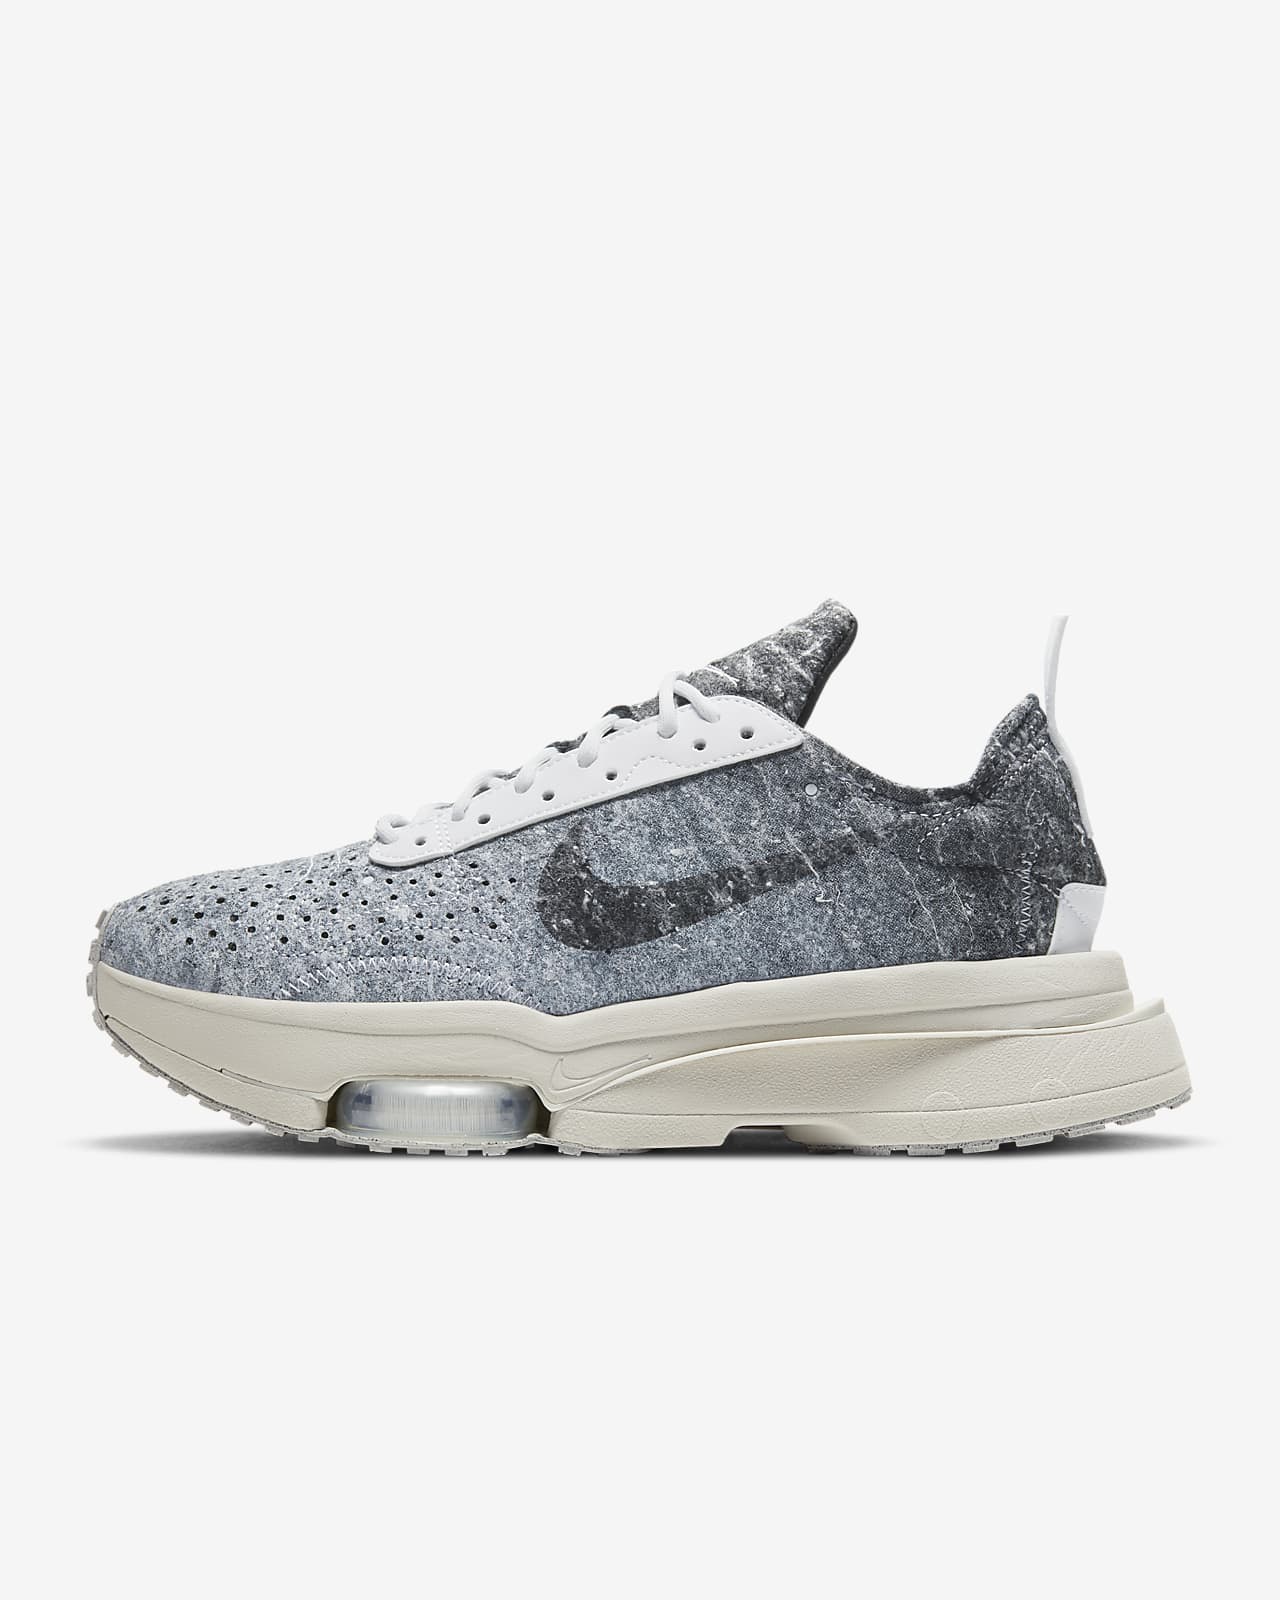 Nike Air Zoom-Type SE Women's Shoes